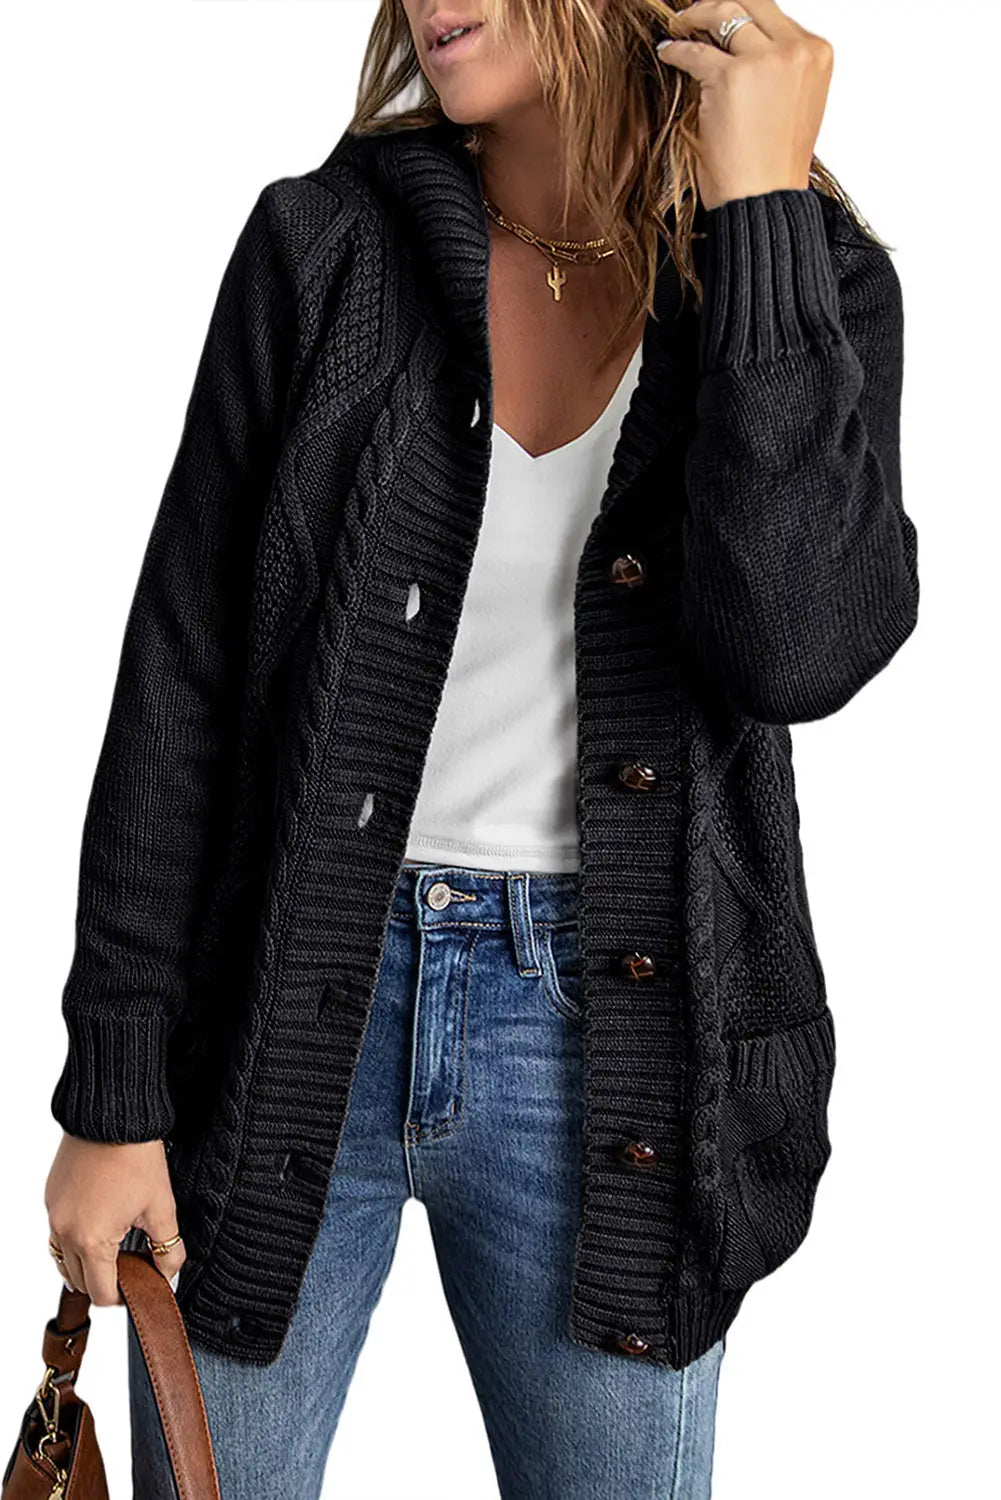 Black twist pattern knit button front hooded cardigan - sweaters & cardigans